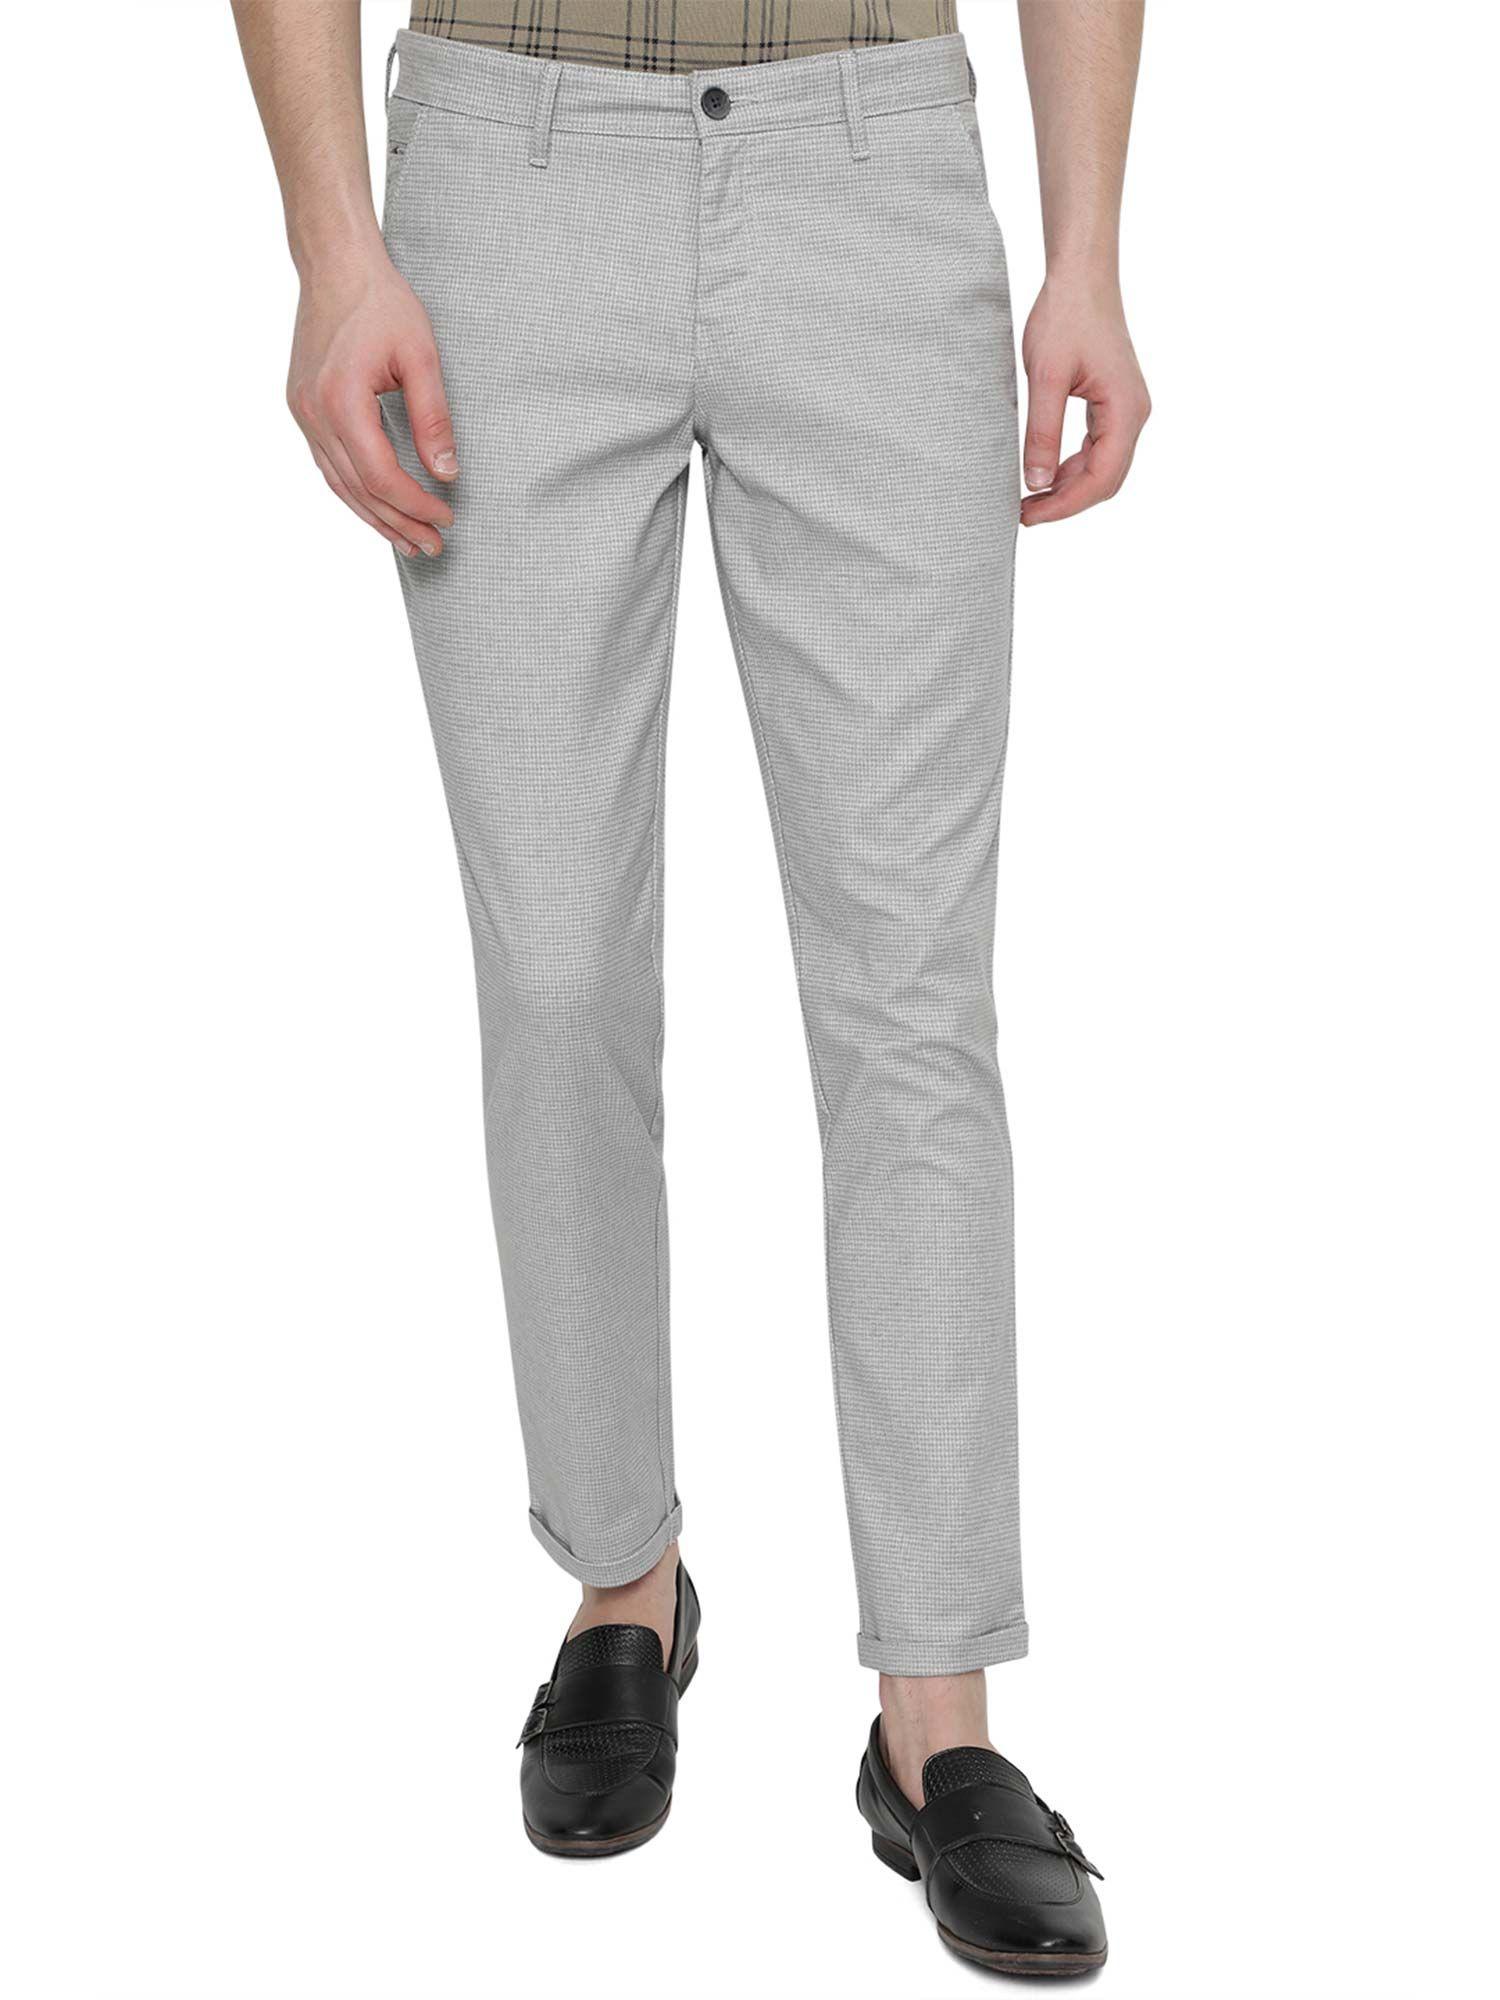 mens-light-grey-cotton-neo-fit-solid-casual-trouser